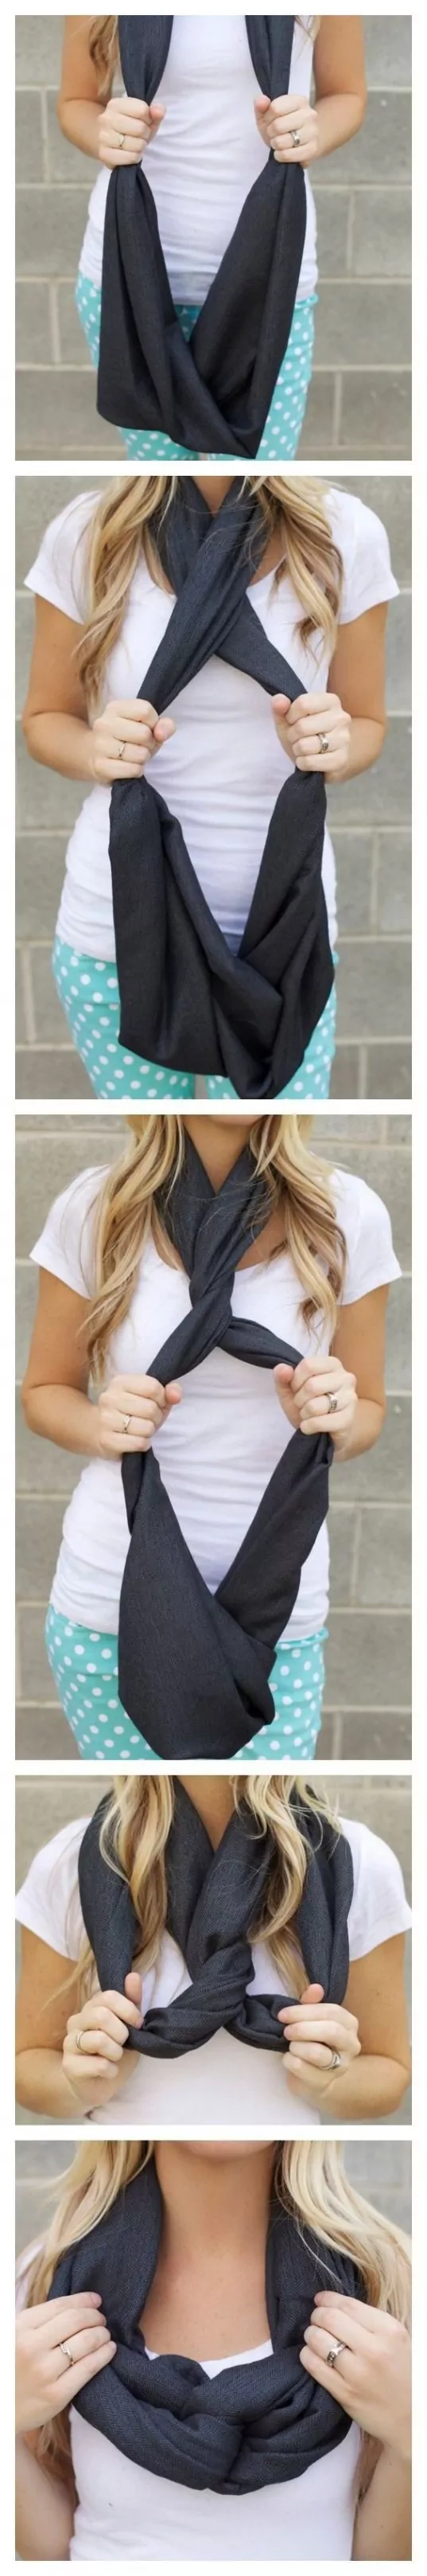 How to tie a scarf The Neat Twist